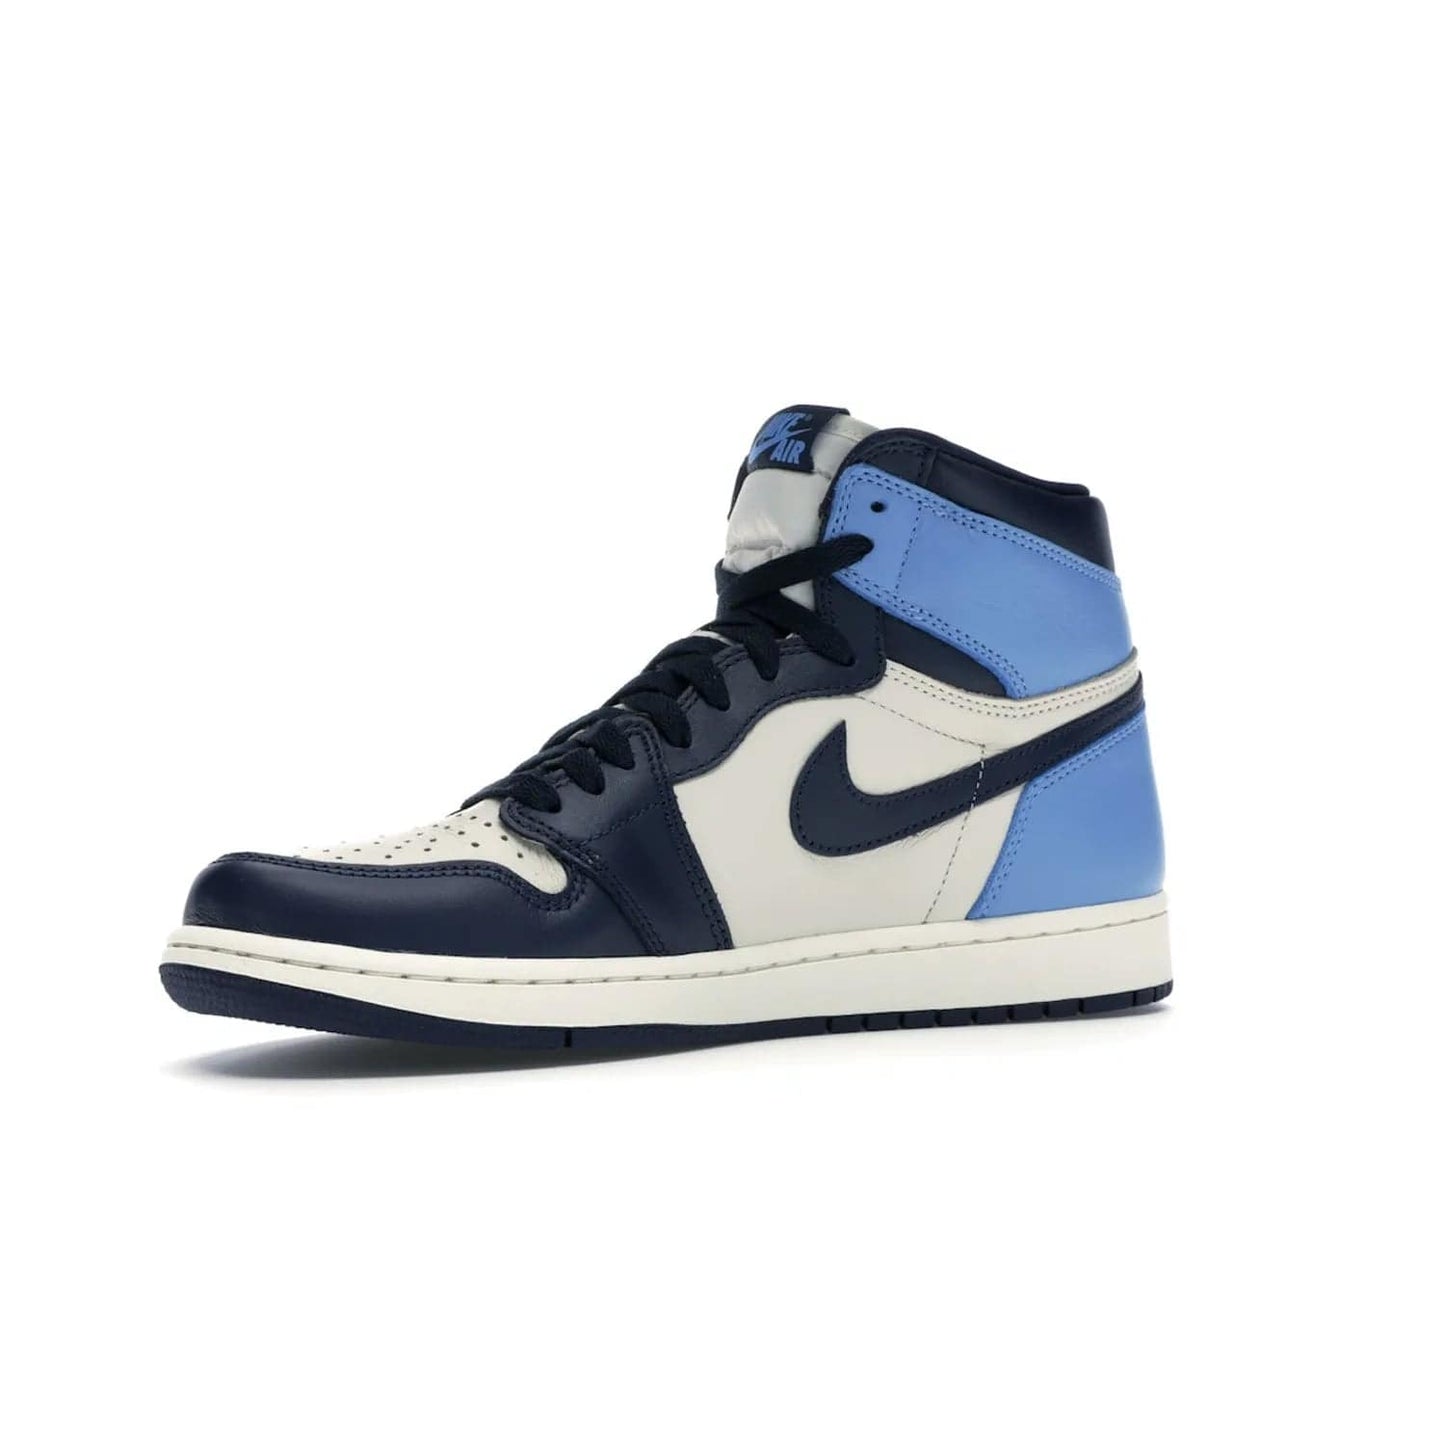 Jordan 1 Retro High Obsidian UNC - Image 16 - Only at www.BallersClubKickz.com - Bring a timeless classic to your wardrobe with the Air Jordan 1 Retro High "Obsidian/University Blue”. A full leather upper combines Obsidian and University Blue detailing for a retro Jordan style. Stitched Jumpman logo pays tribute to UNC. Experience classic style with a timeless sneaker.